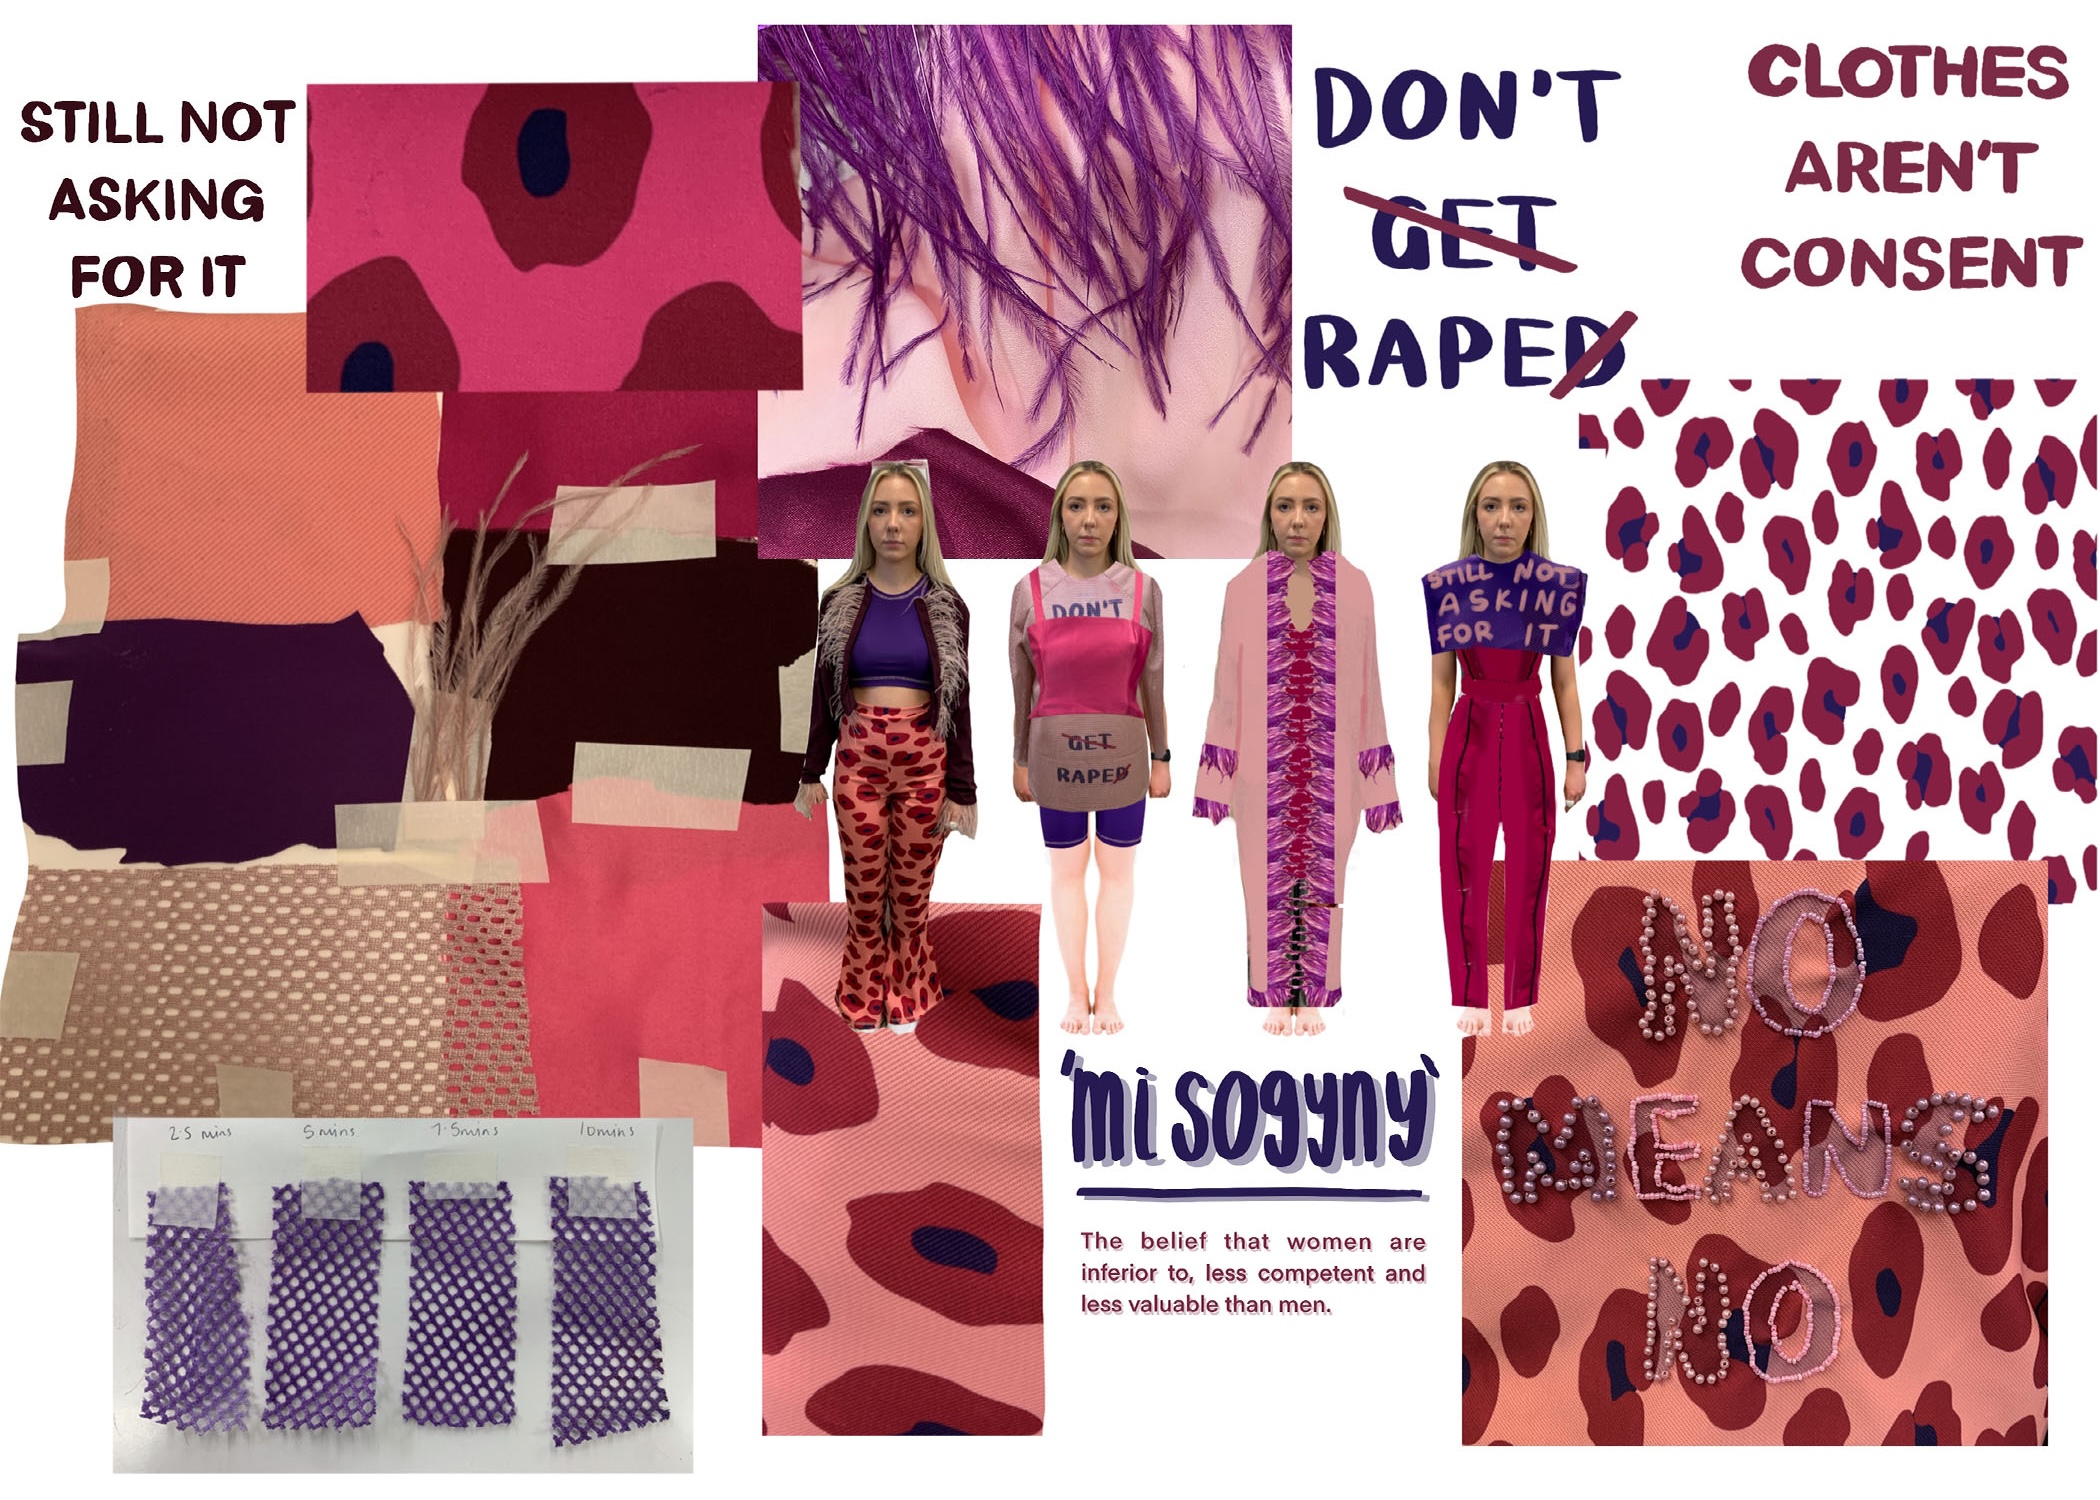 Moodboard for the first two outfits in my collection ‘Clothes Aren’t Consent’